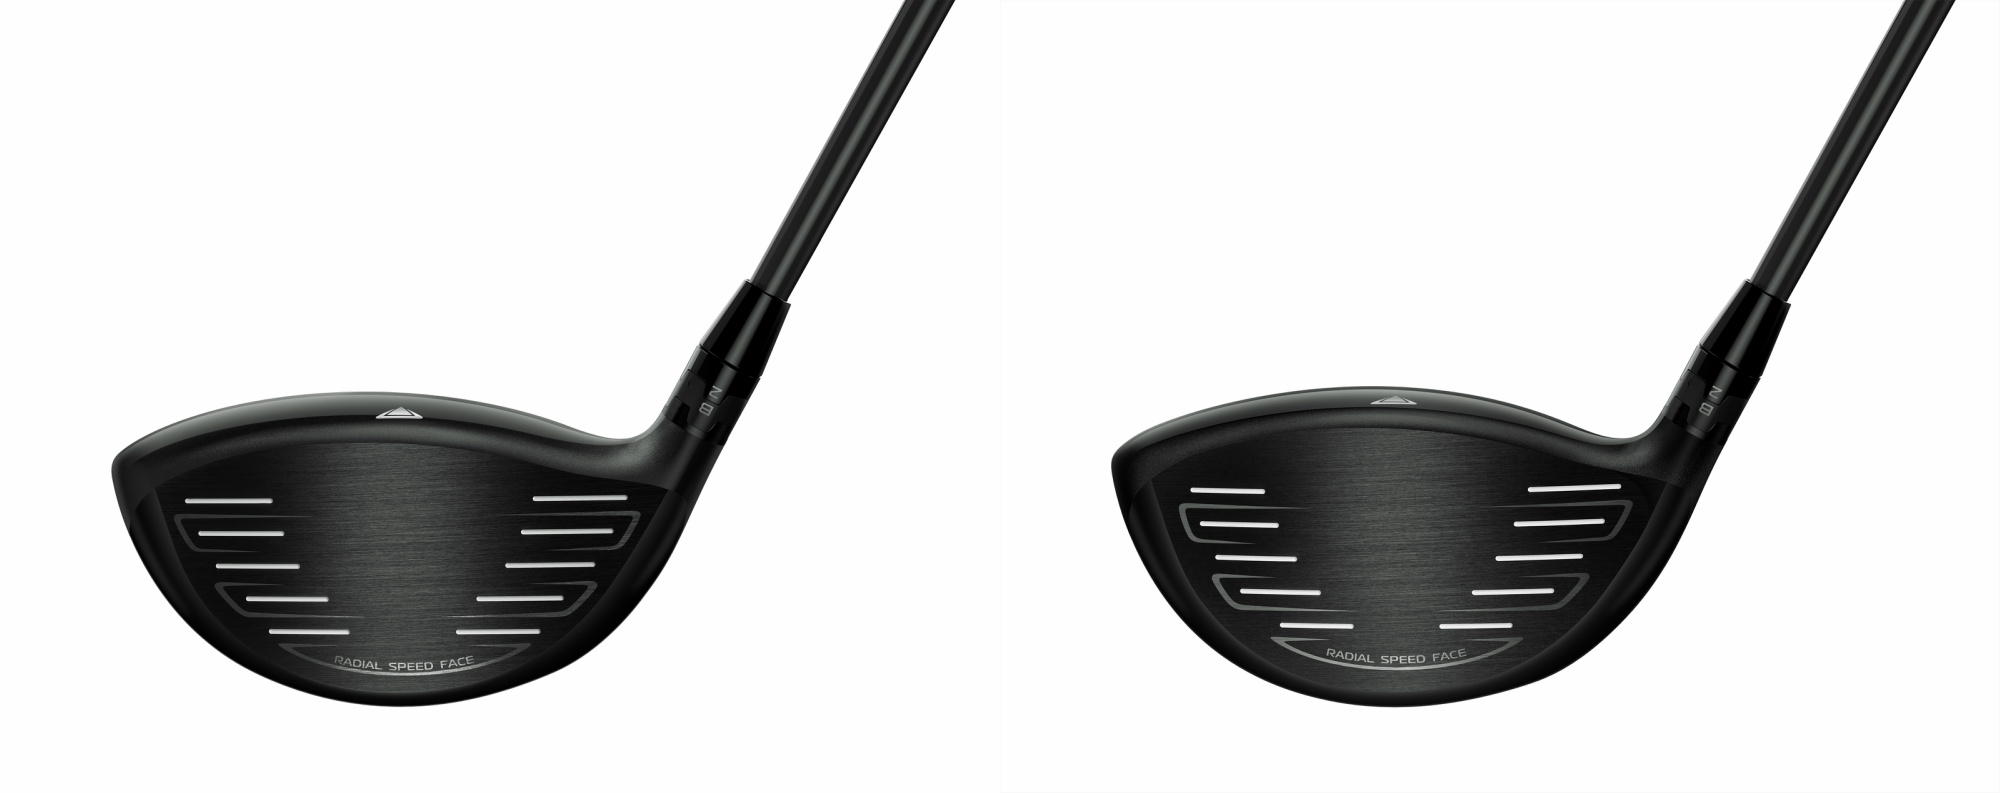 Titleist reveal 917 drivers